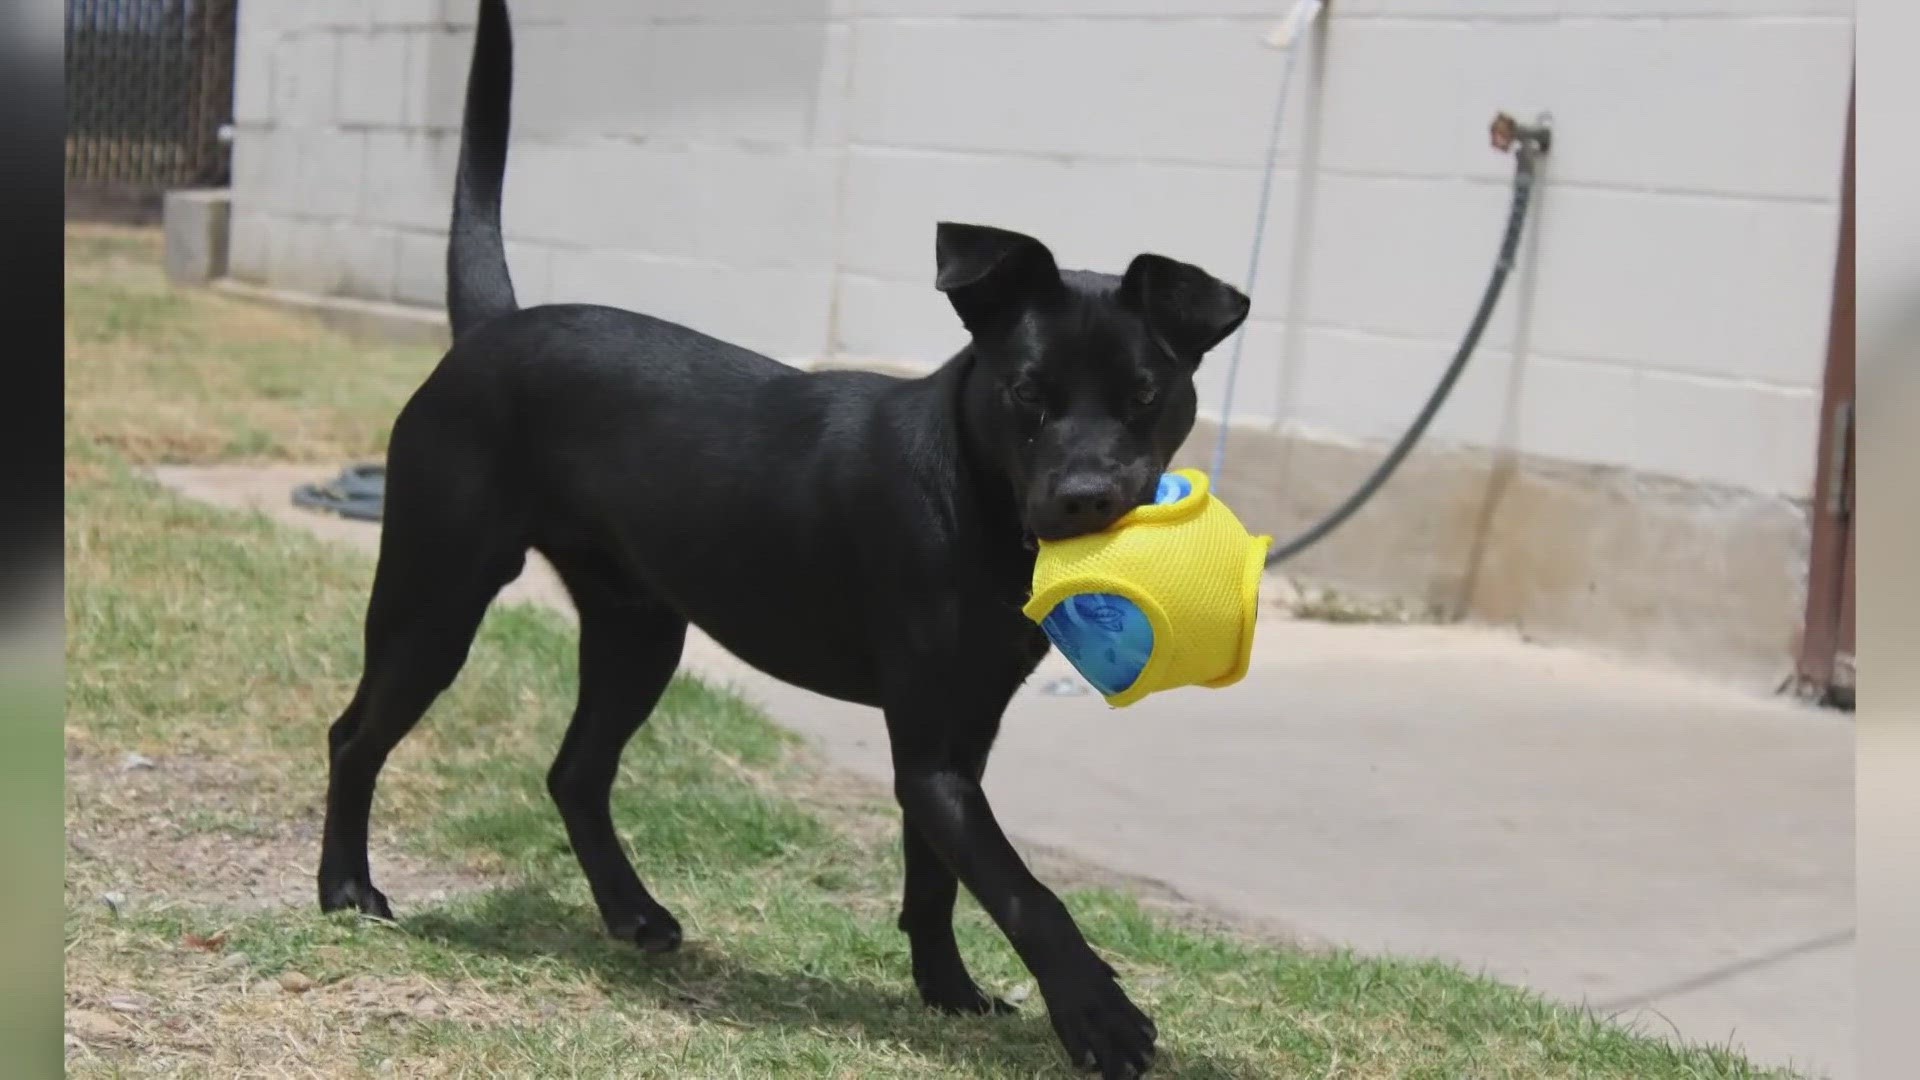 Tug is a one-year-old Labrador Retriever mix!